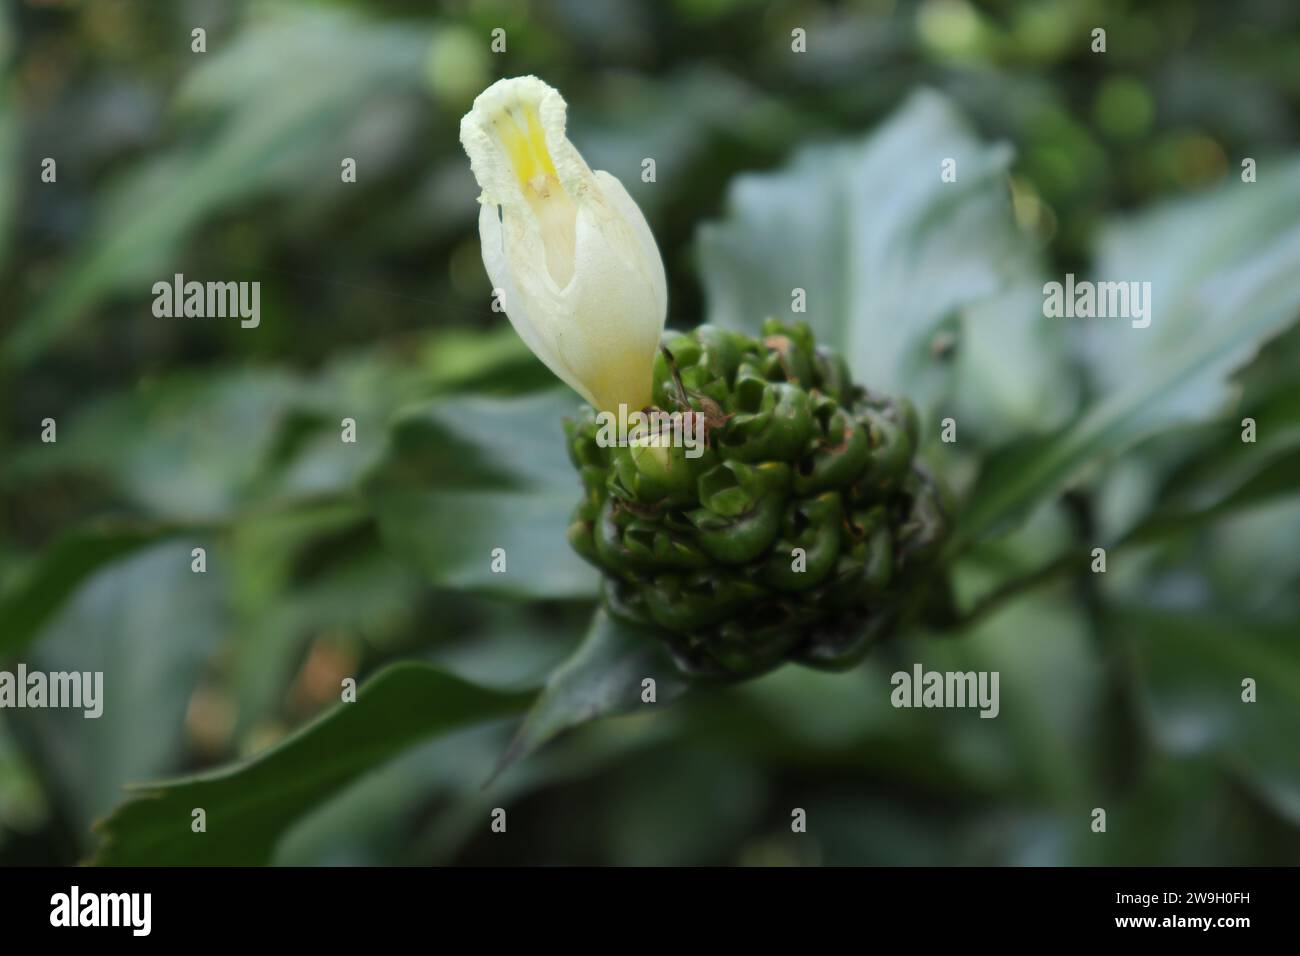 Close up view of a white flower blooming in an inflorescence, the plant belongs to the Costus genus and known as the Spiral Ginger (Costus Dubius). A Stock Photo